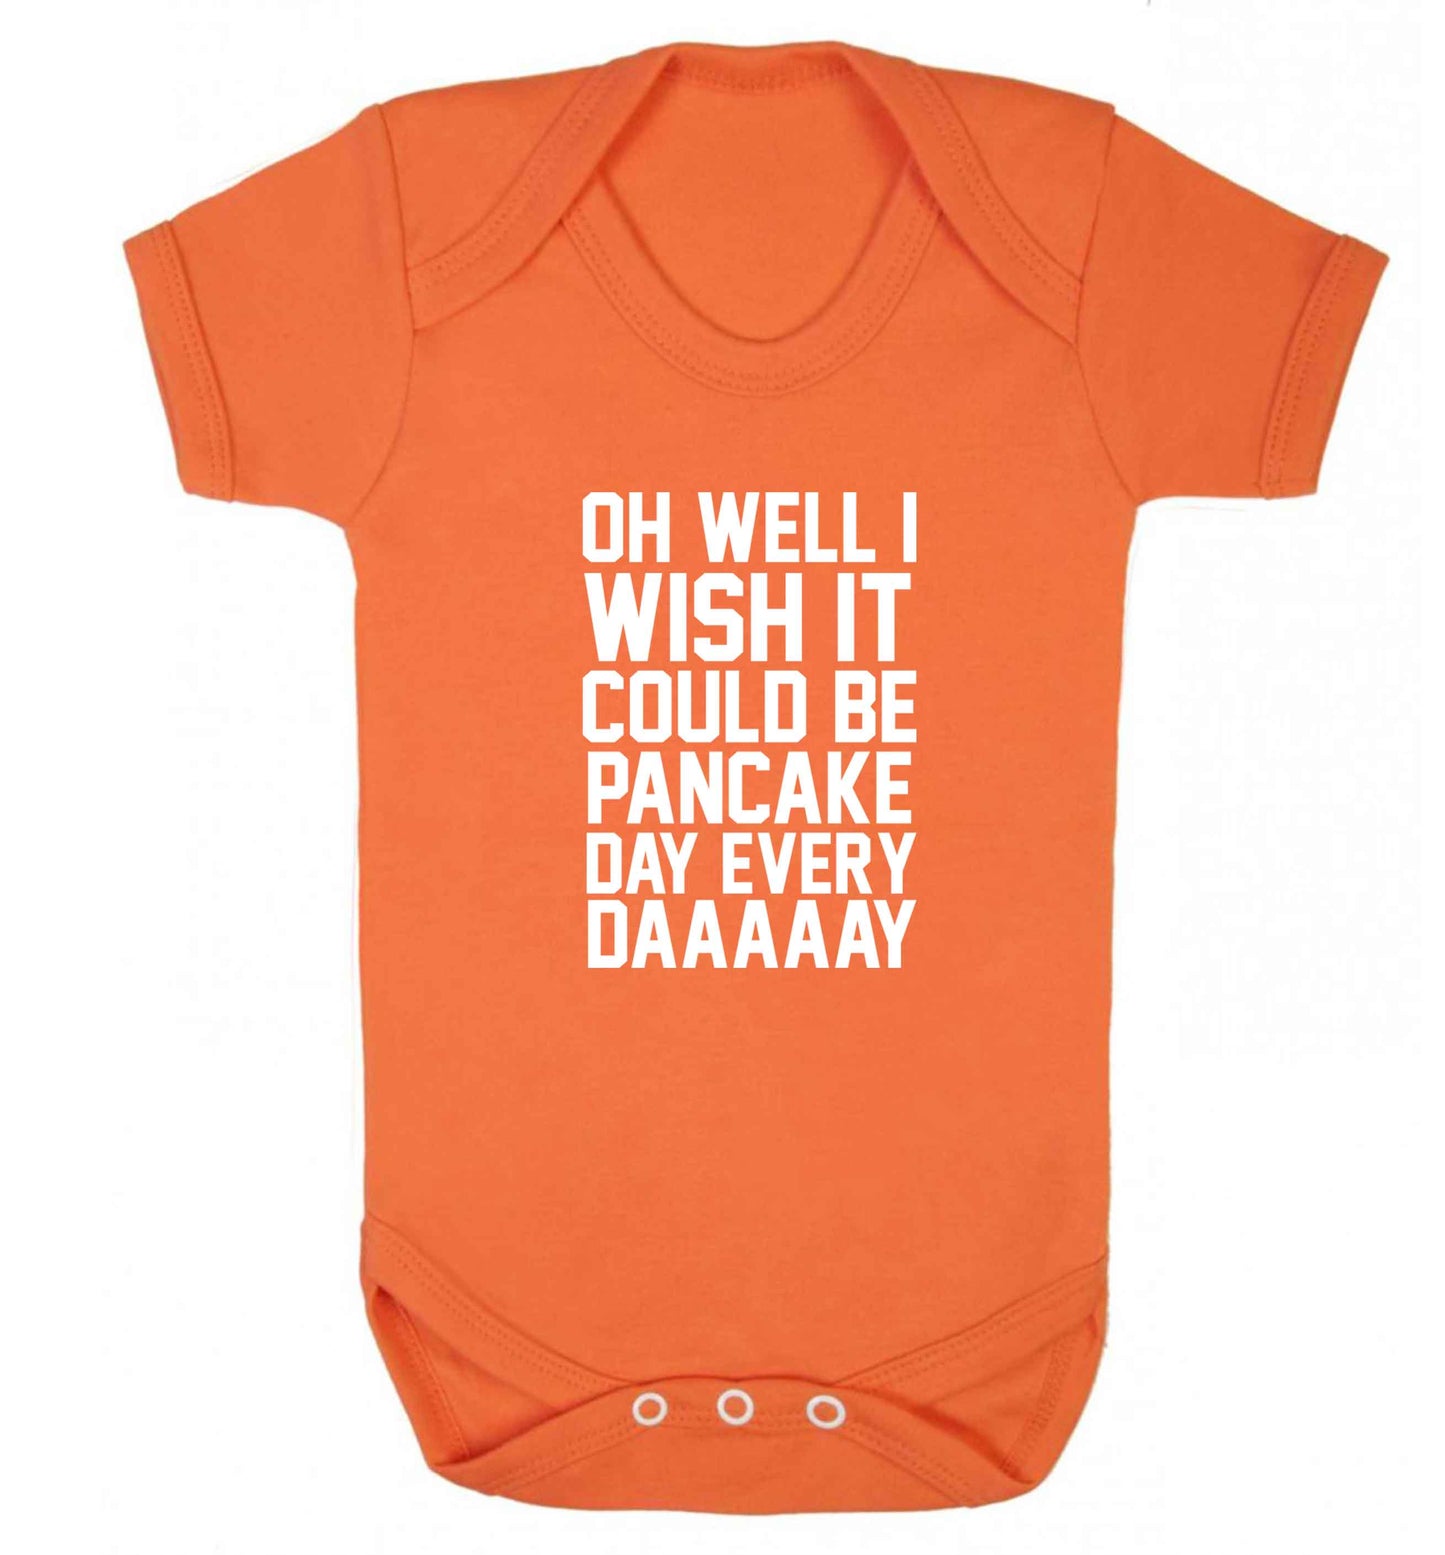 Oh well I wish it could be pancake day every day baby vest orange 18-24 months